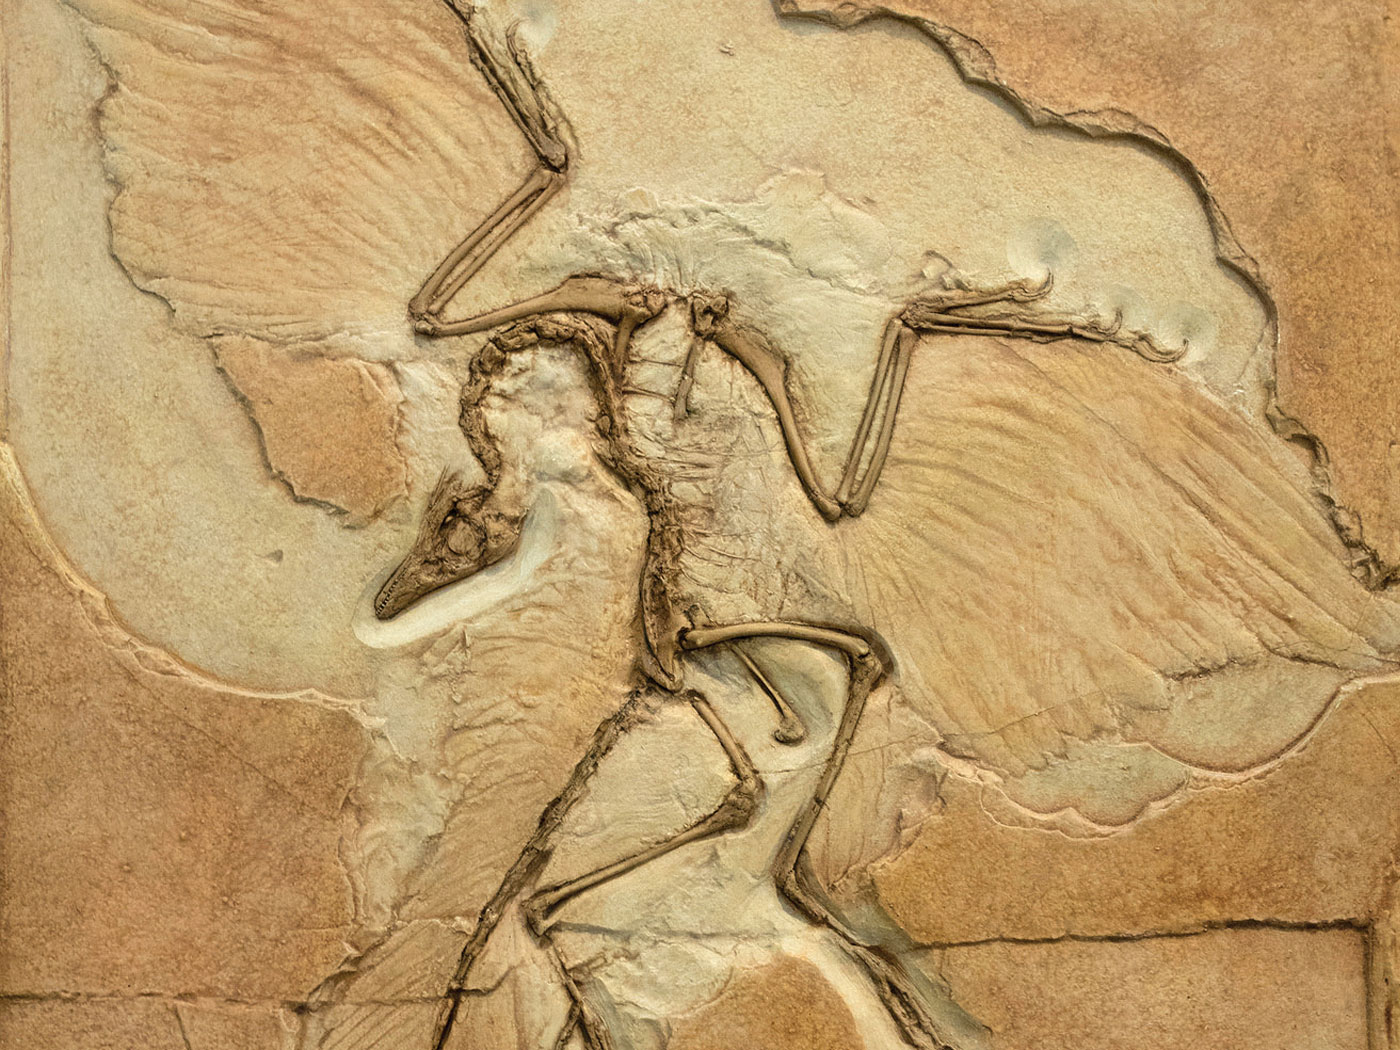 Archaeopteryx by the Numbers | The Institute for Creation Research